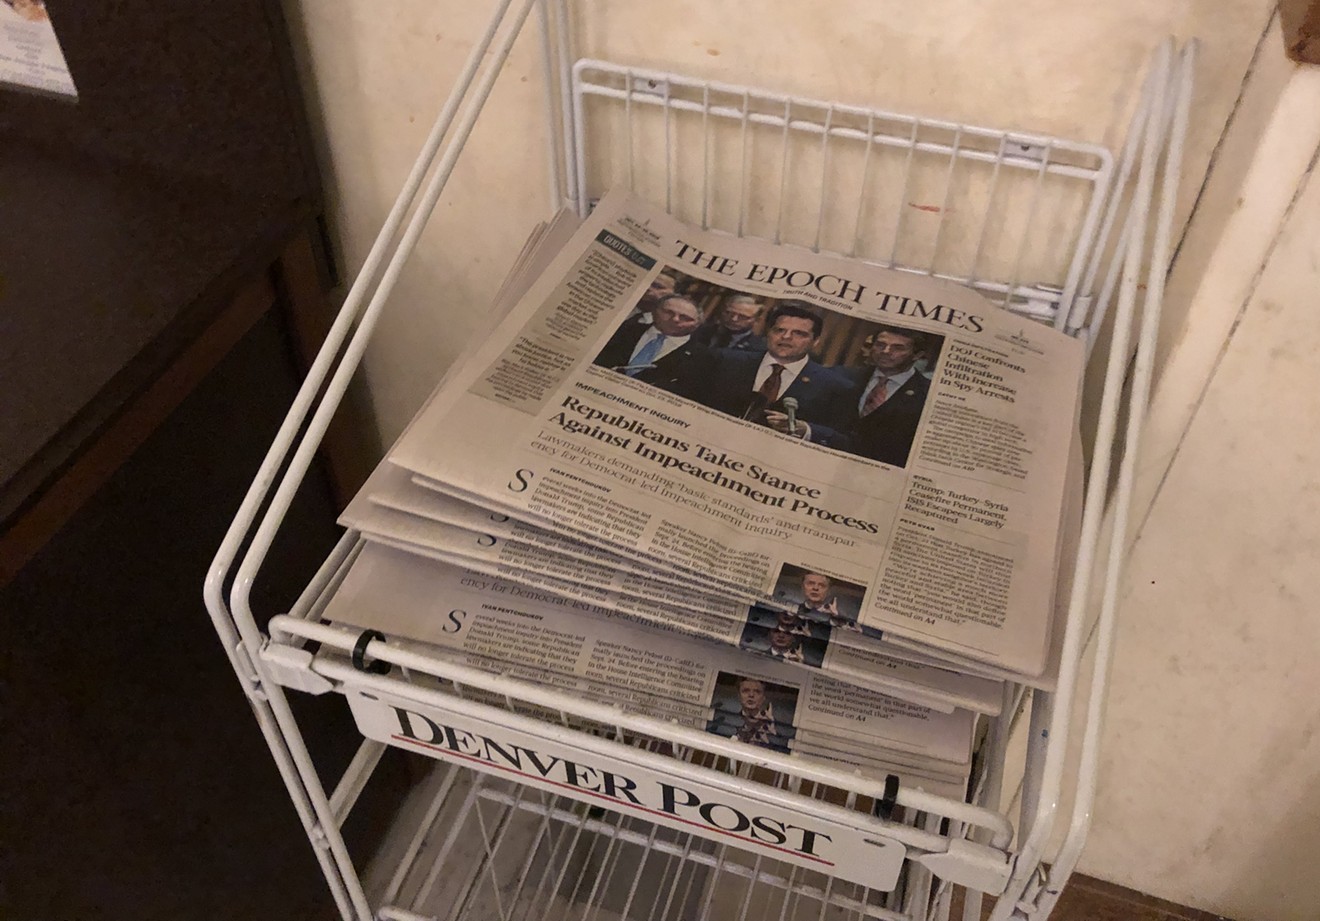 Copies of the Epoch Times in a newsstand in the Colorado State Capitol's cafeteria on October 28, 2019.